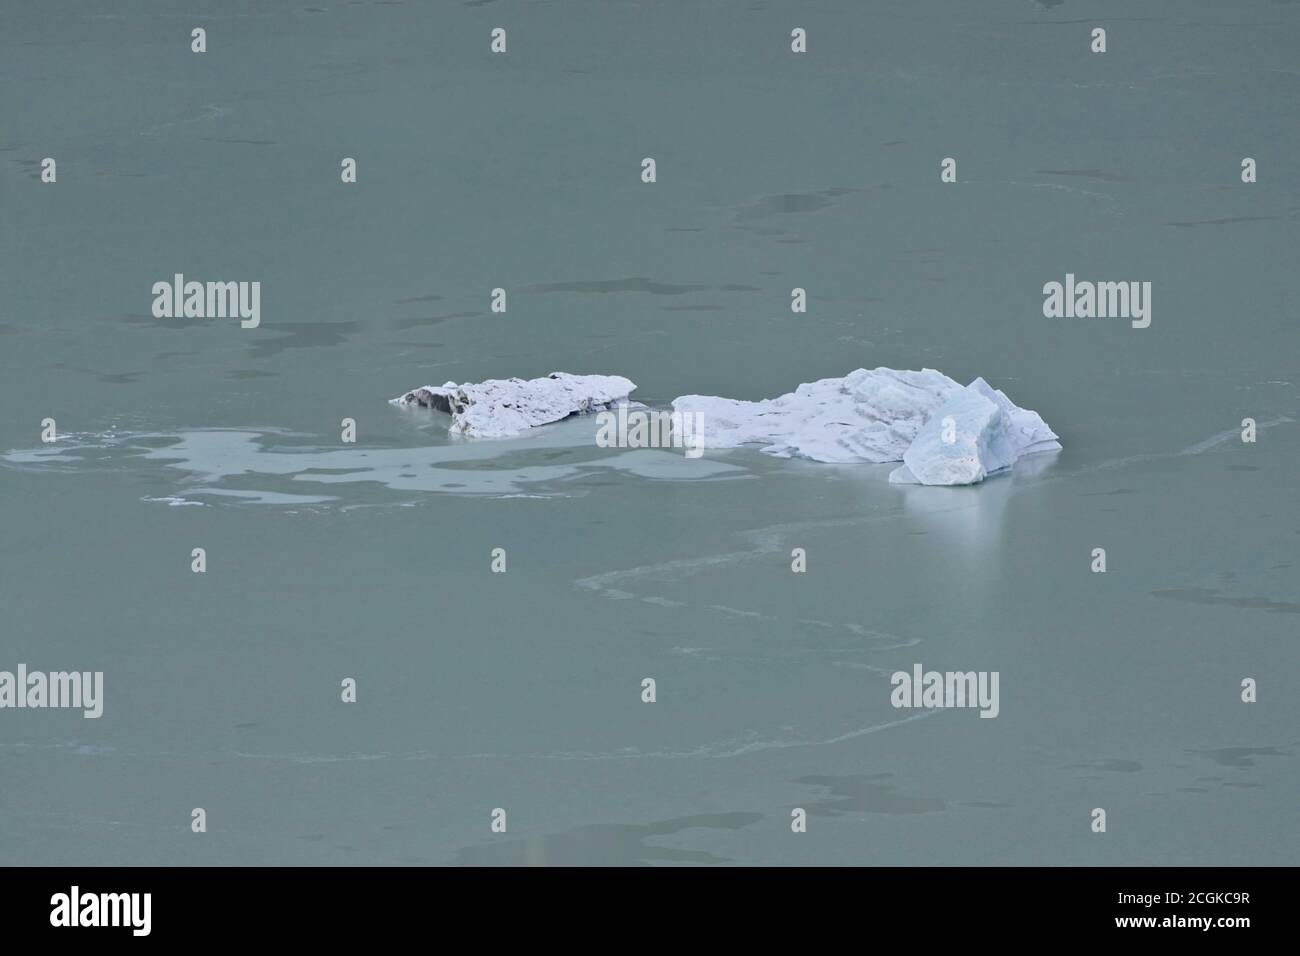 Global warming - closeup melting block of ice or ice berg on a frozen blue lake Stock Photo